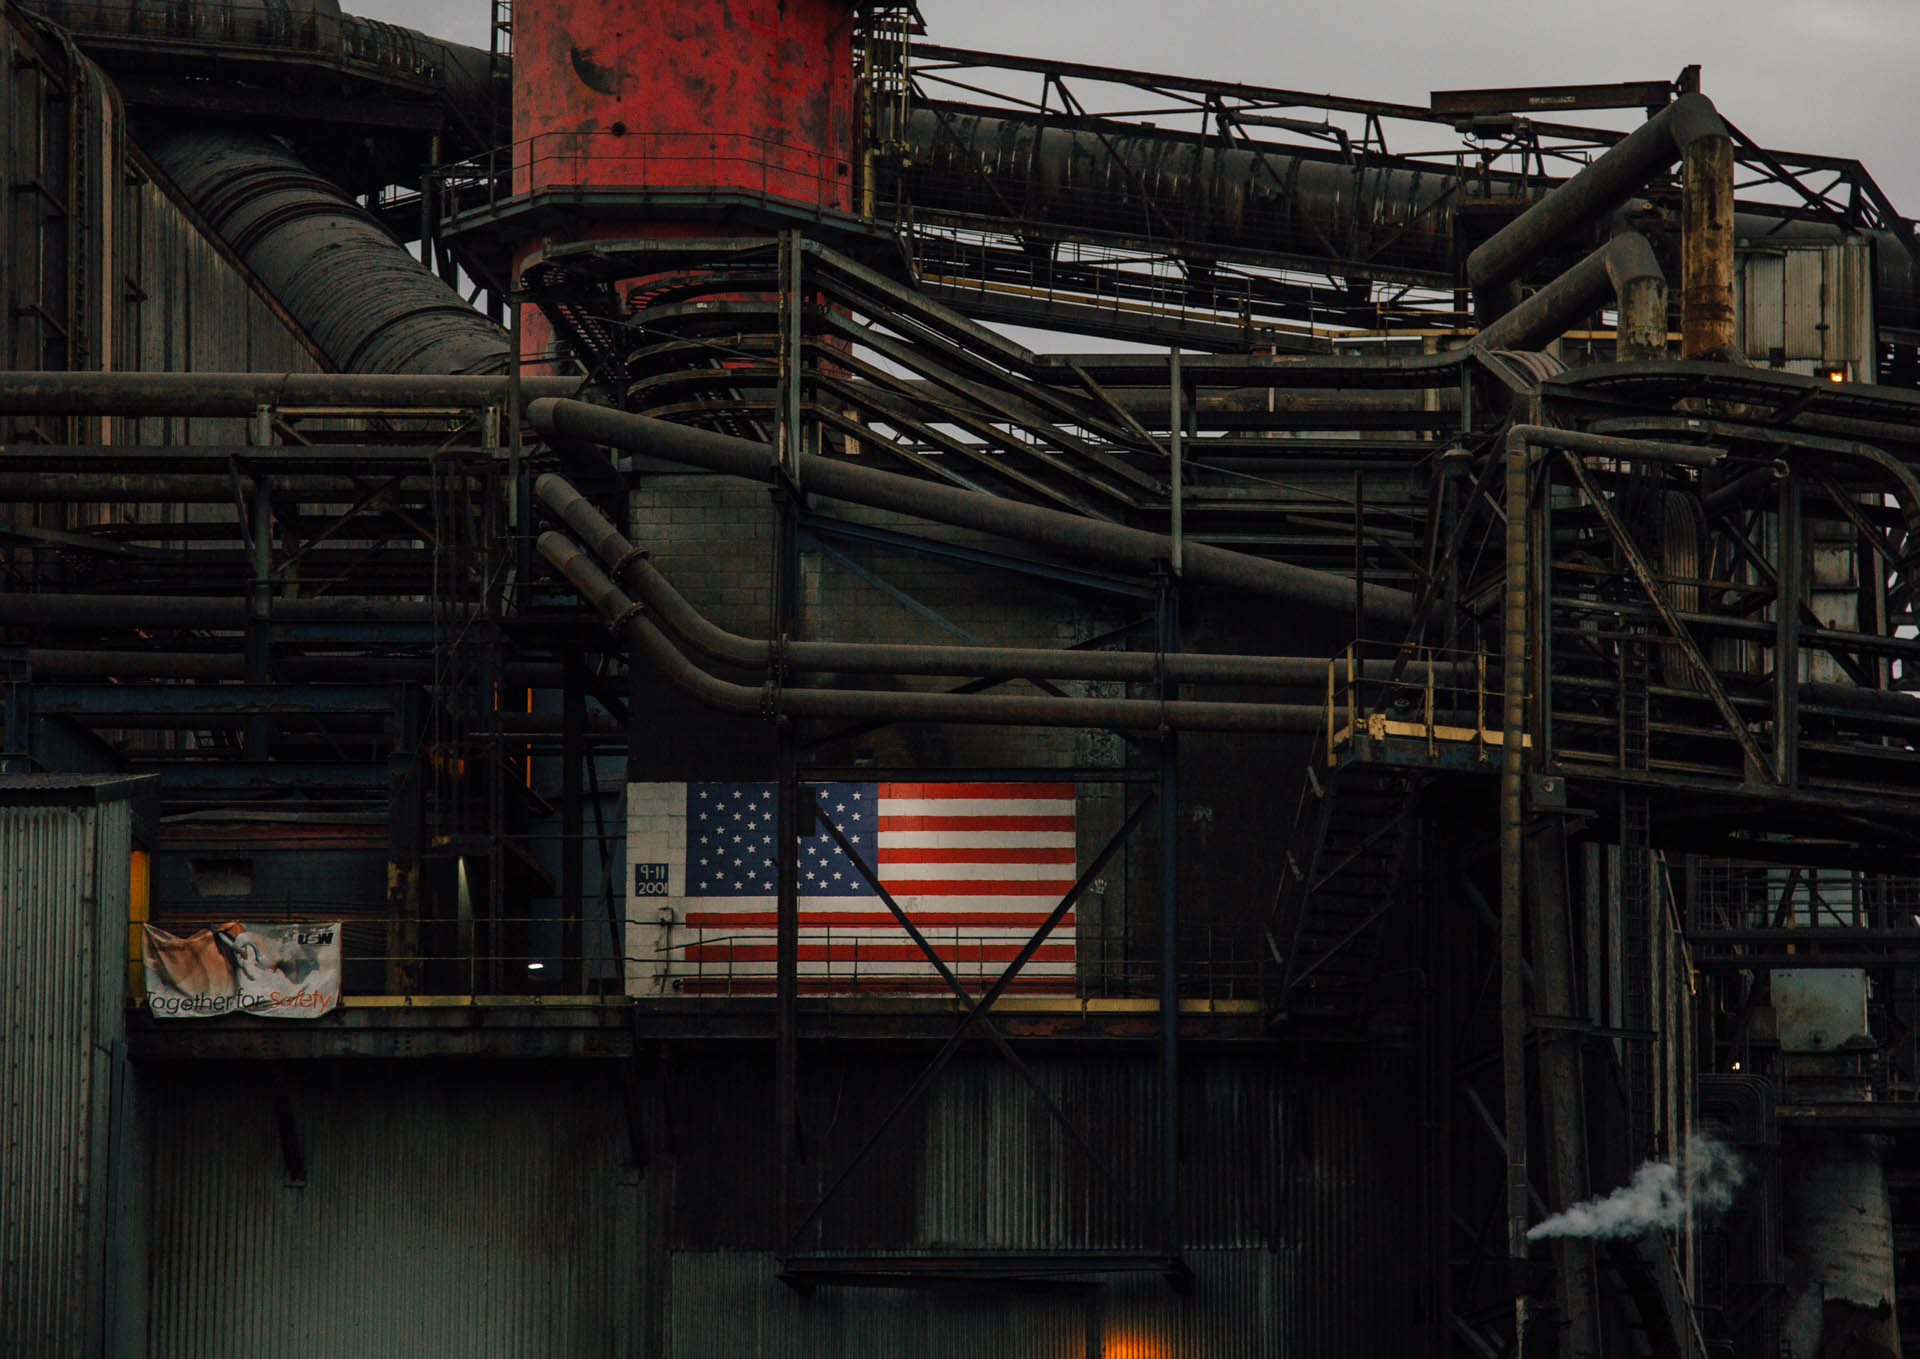 9-11-neverforget-american-flag-steel-mill-cleveland-oh-5432untitled